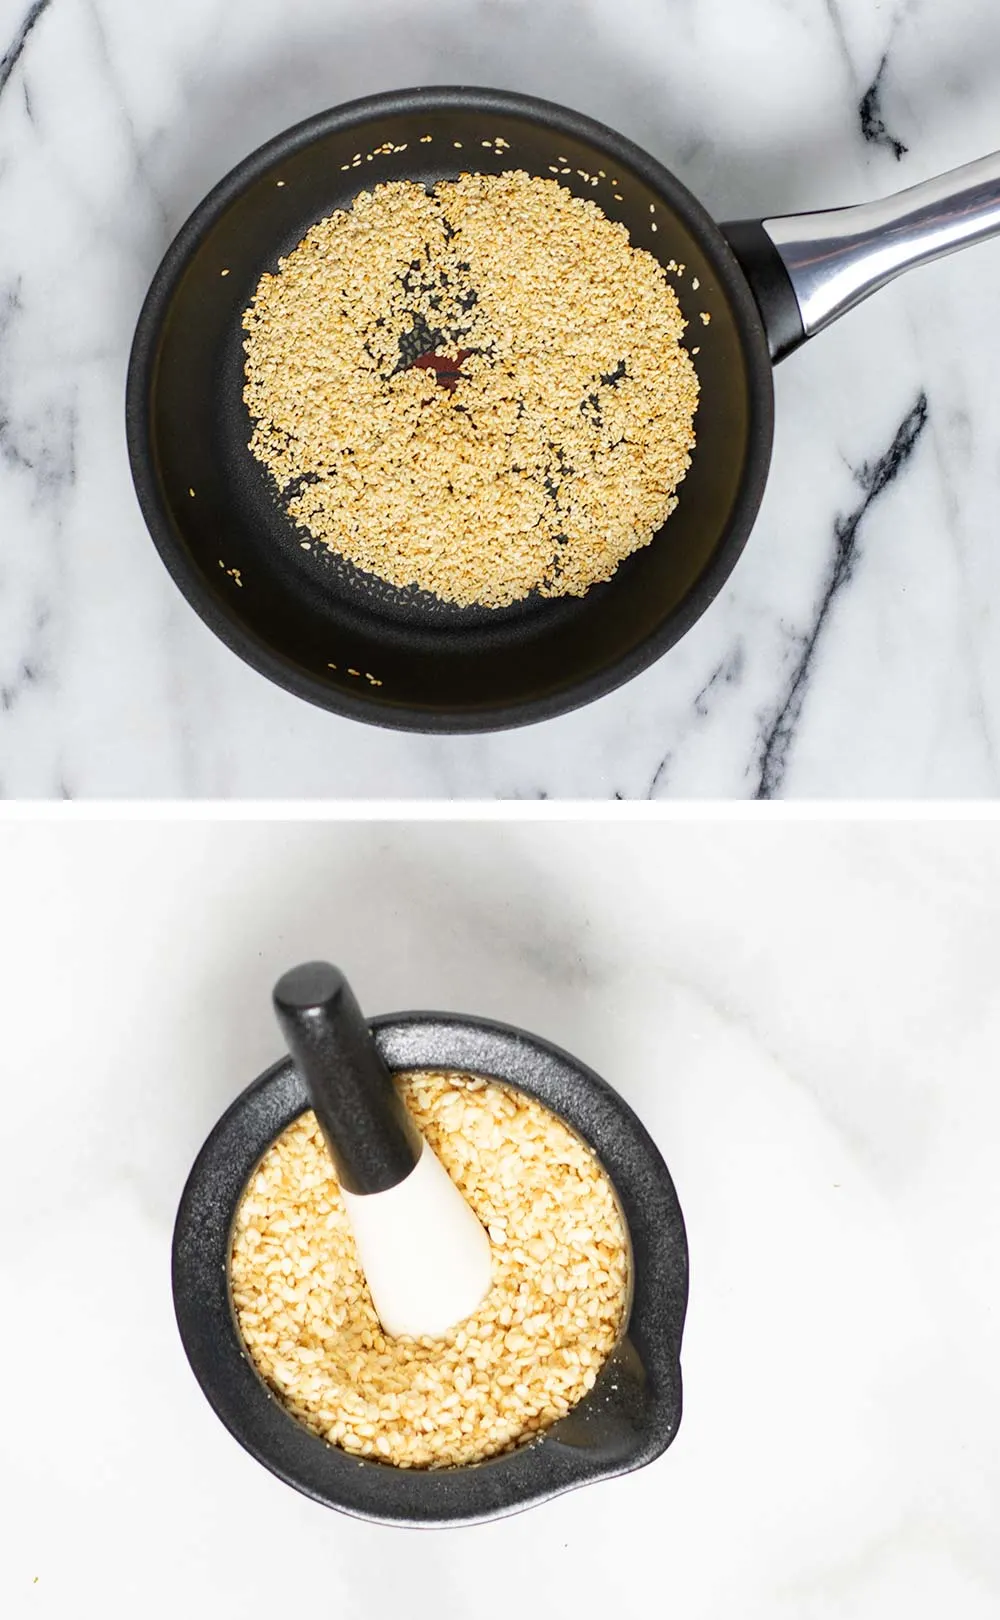 Showing how sesame is roasted in a pan and then crushed in a grinder.